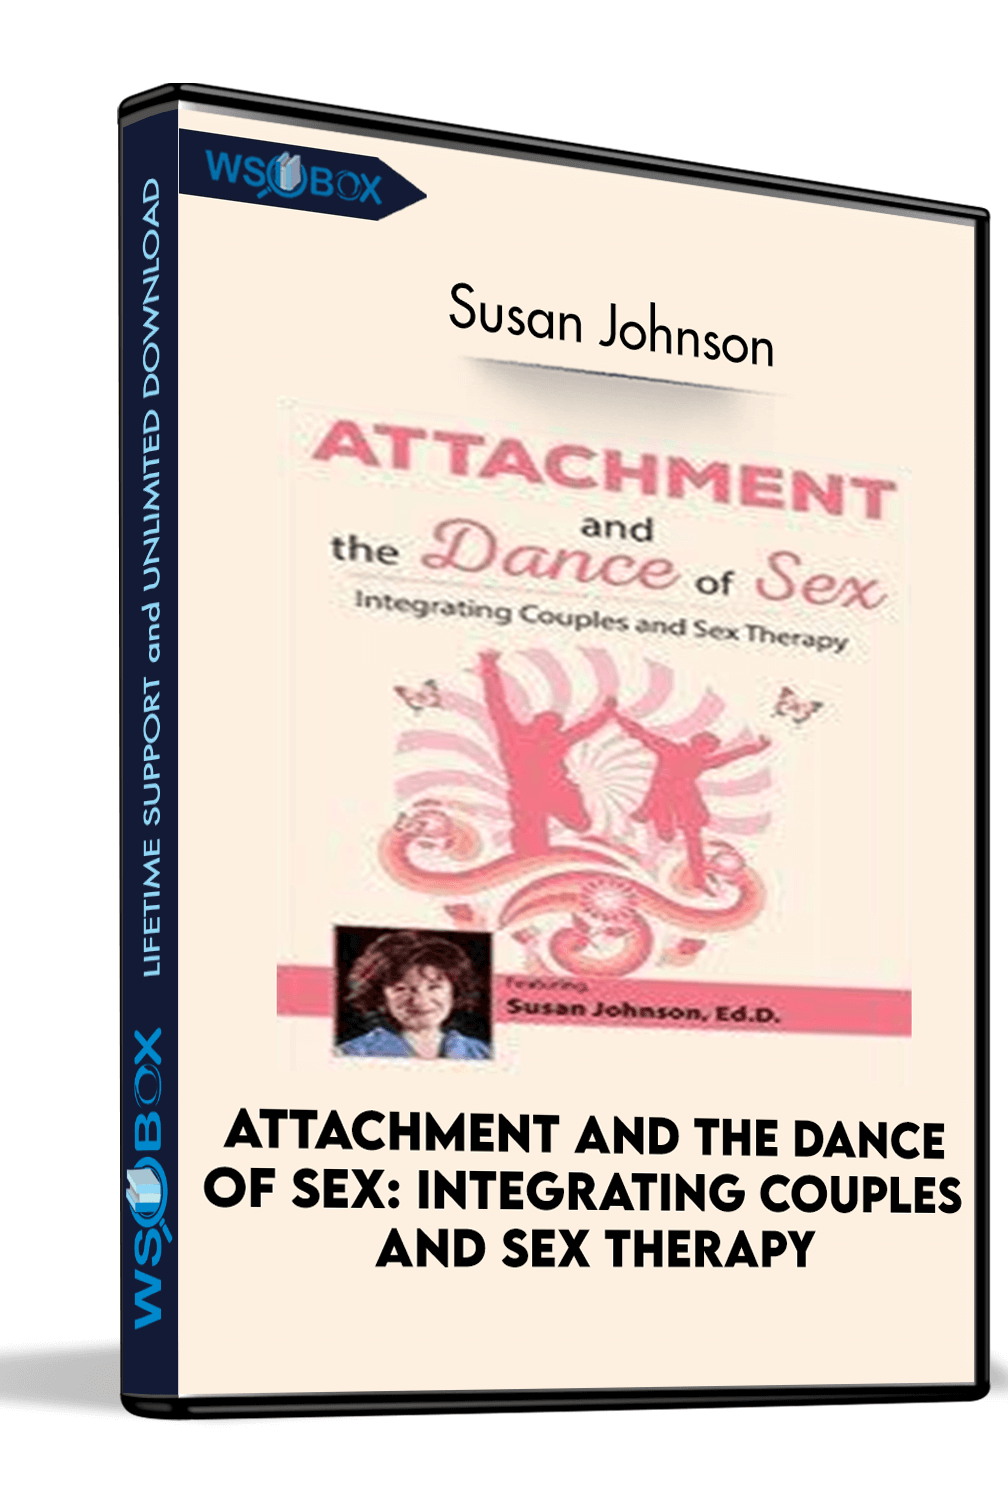 Attachment and the Dance of Sex: Integrating Couples and Sex Therapy – Susan Johnson